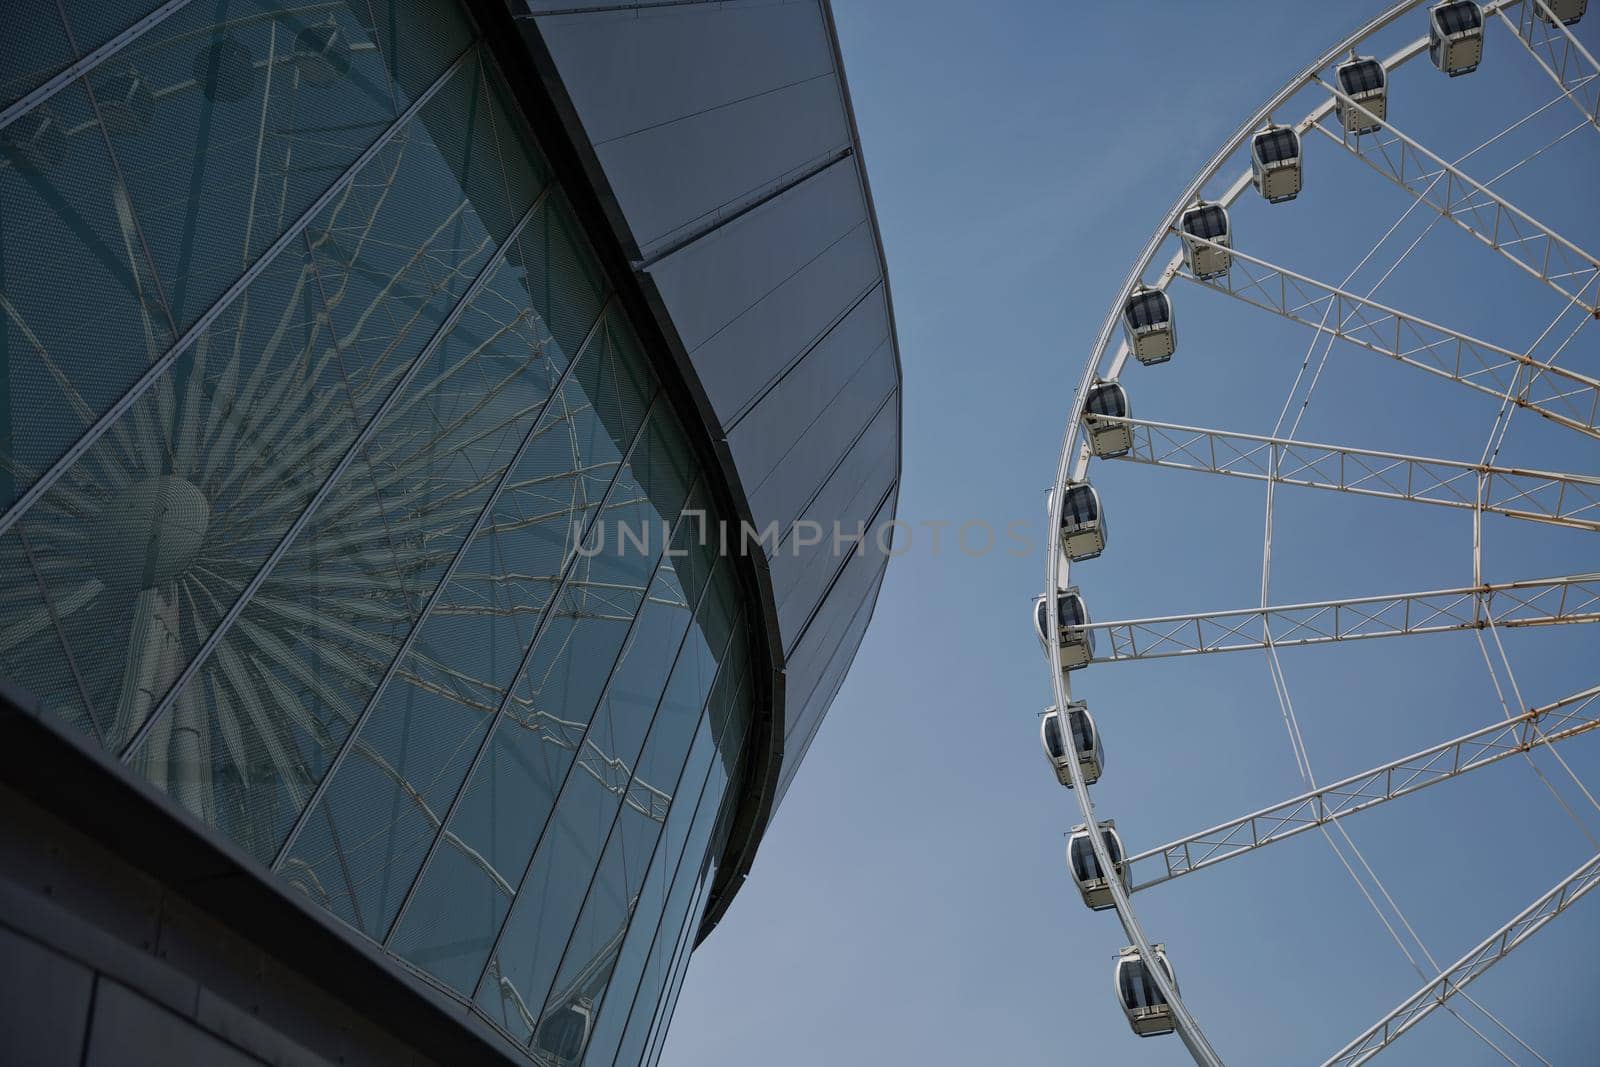 LIVERPOOL, ENGLAND, UK - JUNE 07, 2017: View of the ECHO convention center and an adjacent ferris wheel in Liverpool, England